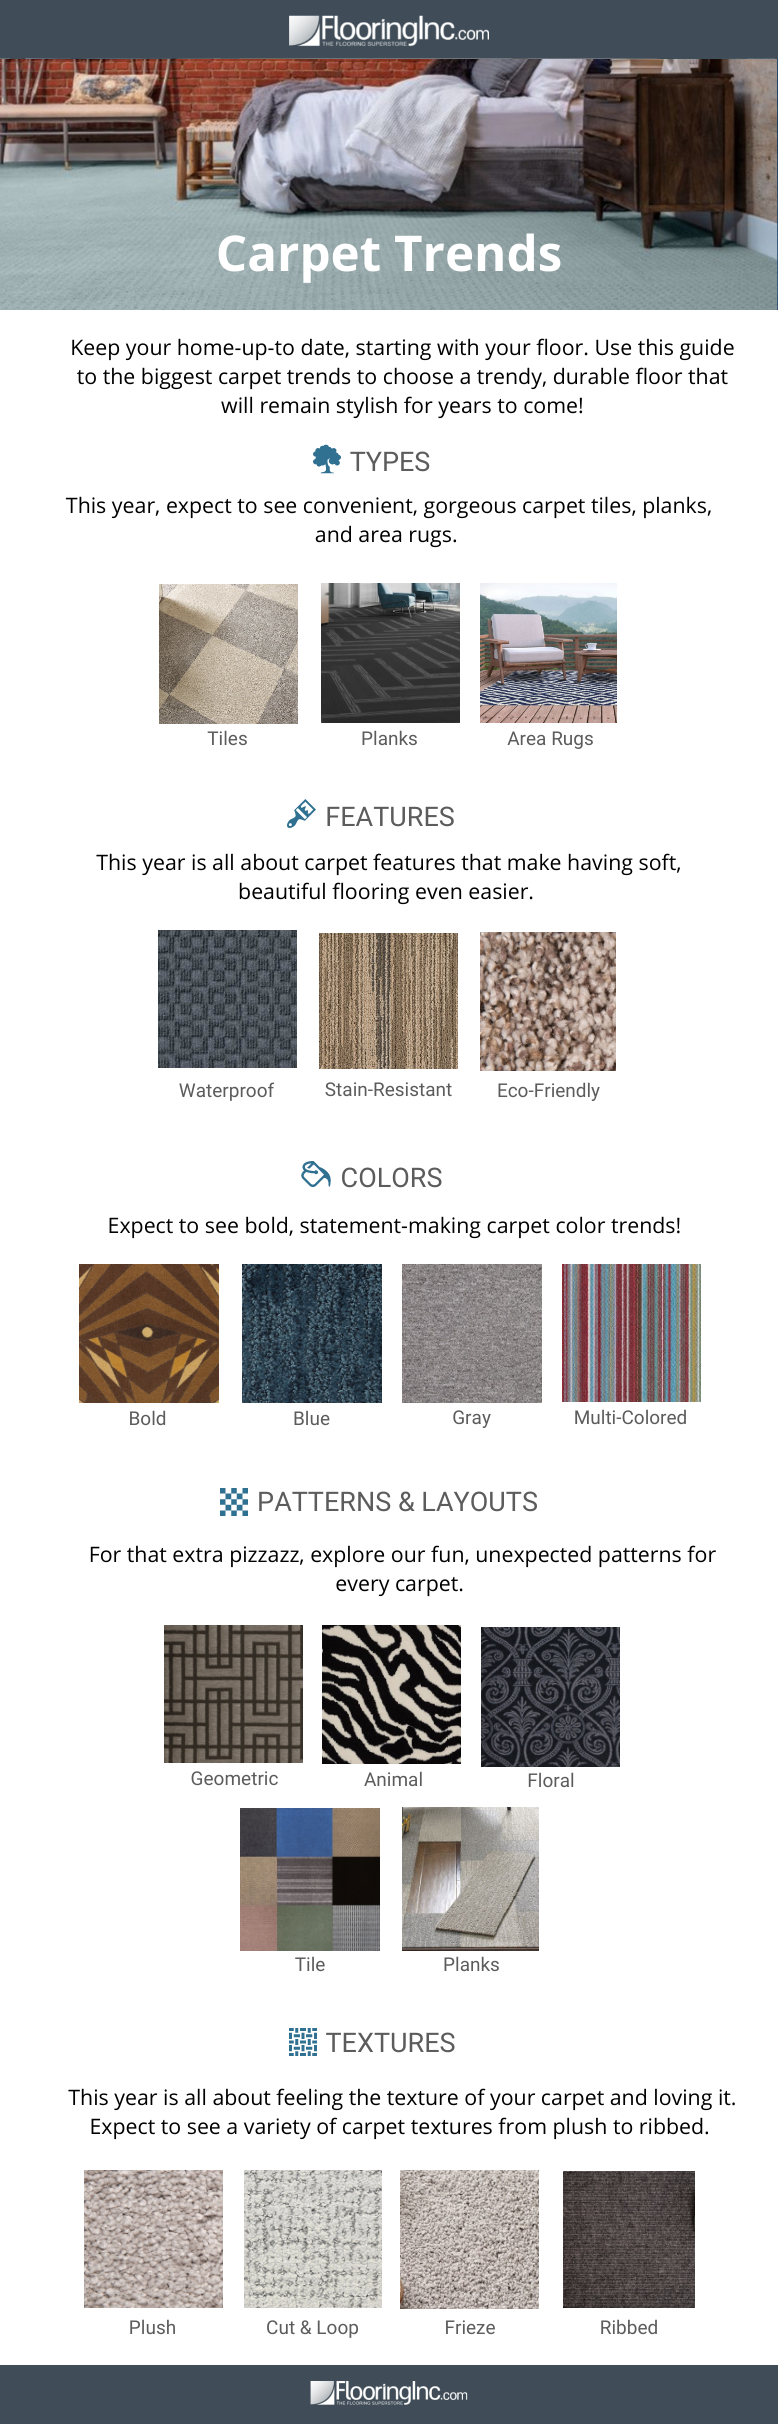 Flooring Trends: Is Carpet Making a Comeback?